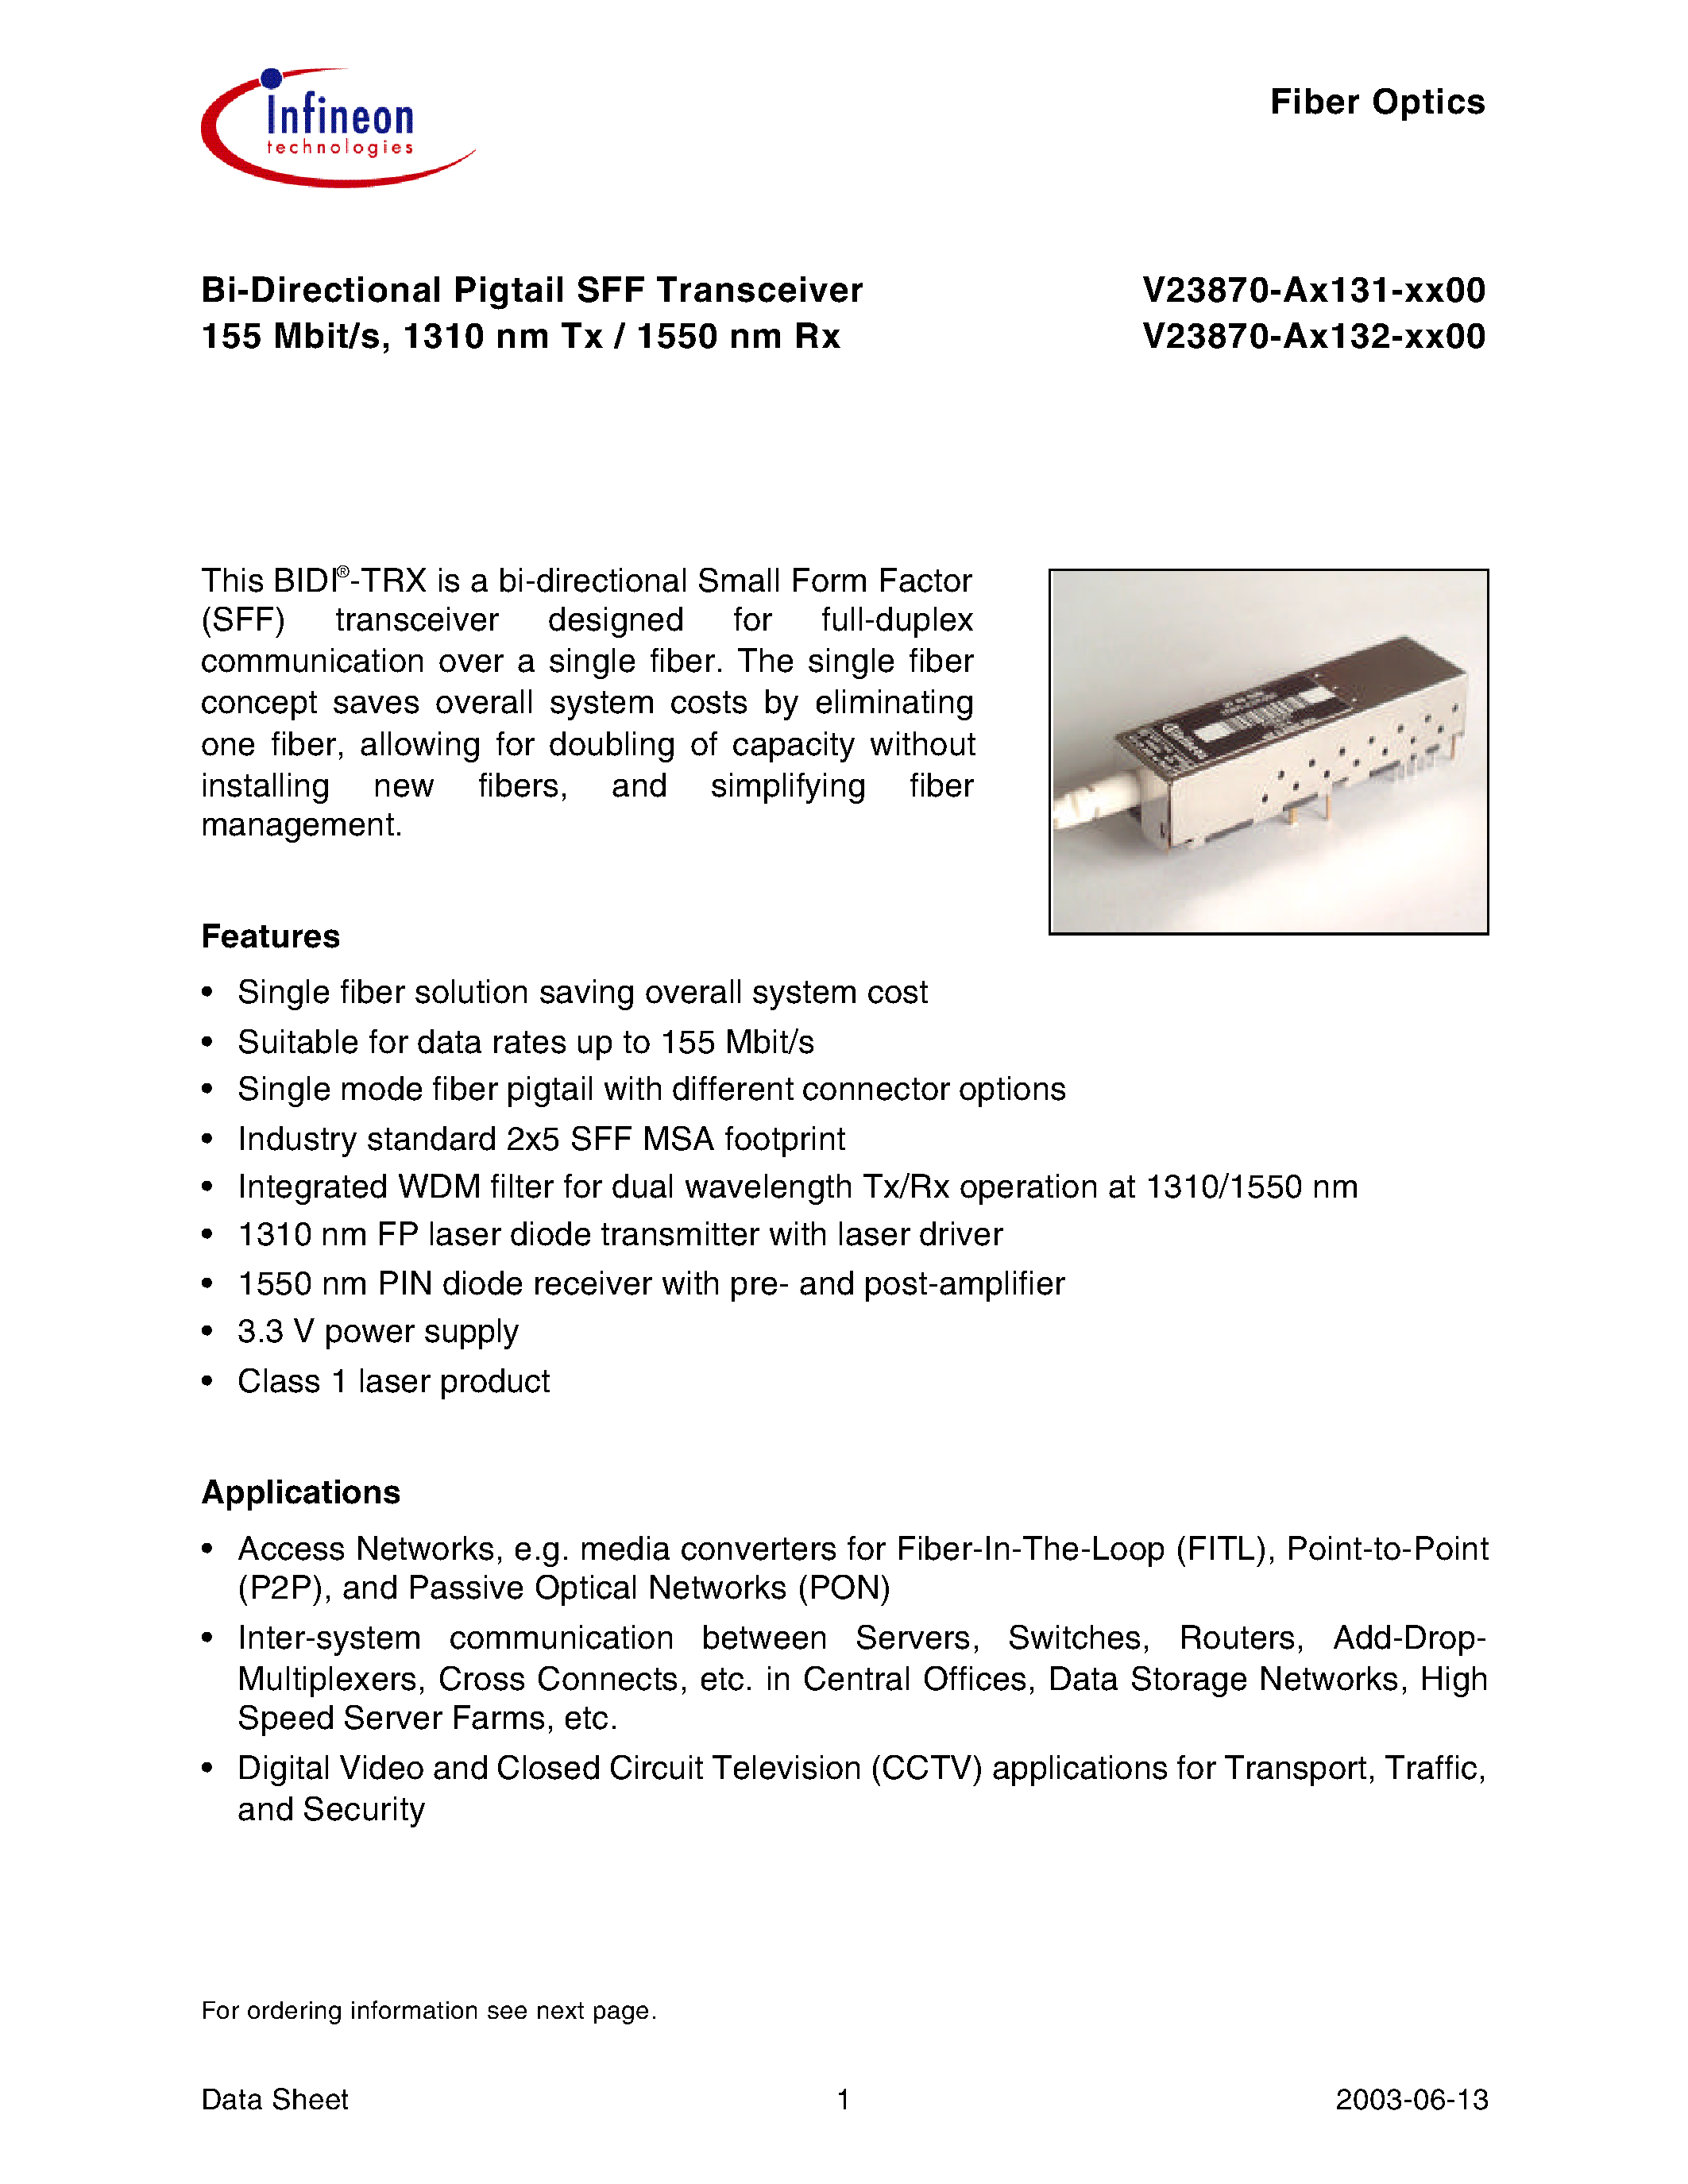 Datasheet V23870-A3132-A500 - Bi-Directional Pigtail SFF Transceiver 155 Mbit/s/ 1310 nm Tx / 1550 nm Rx page 1